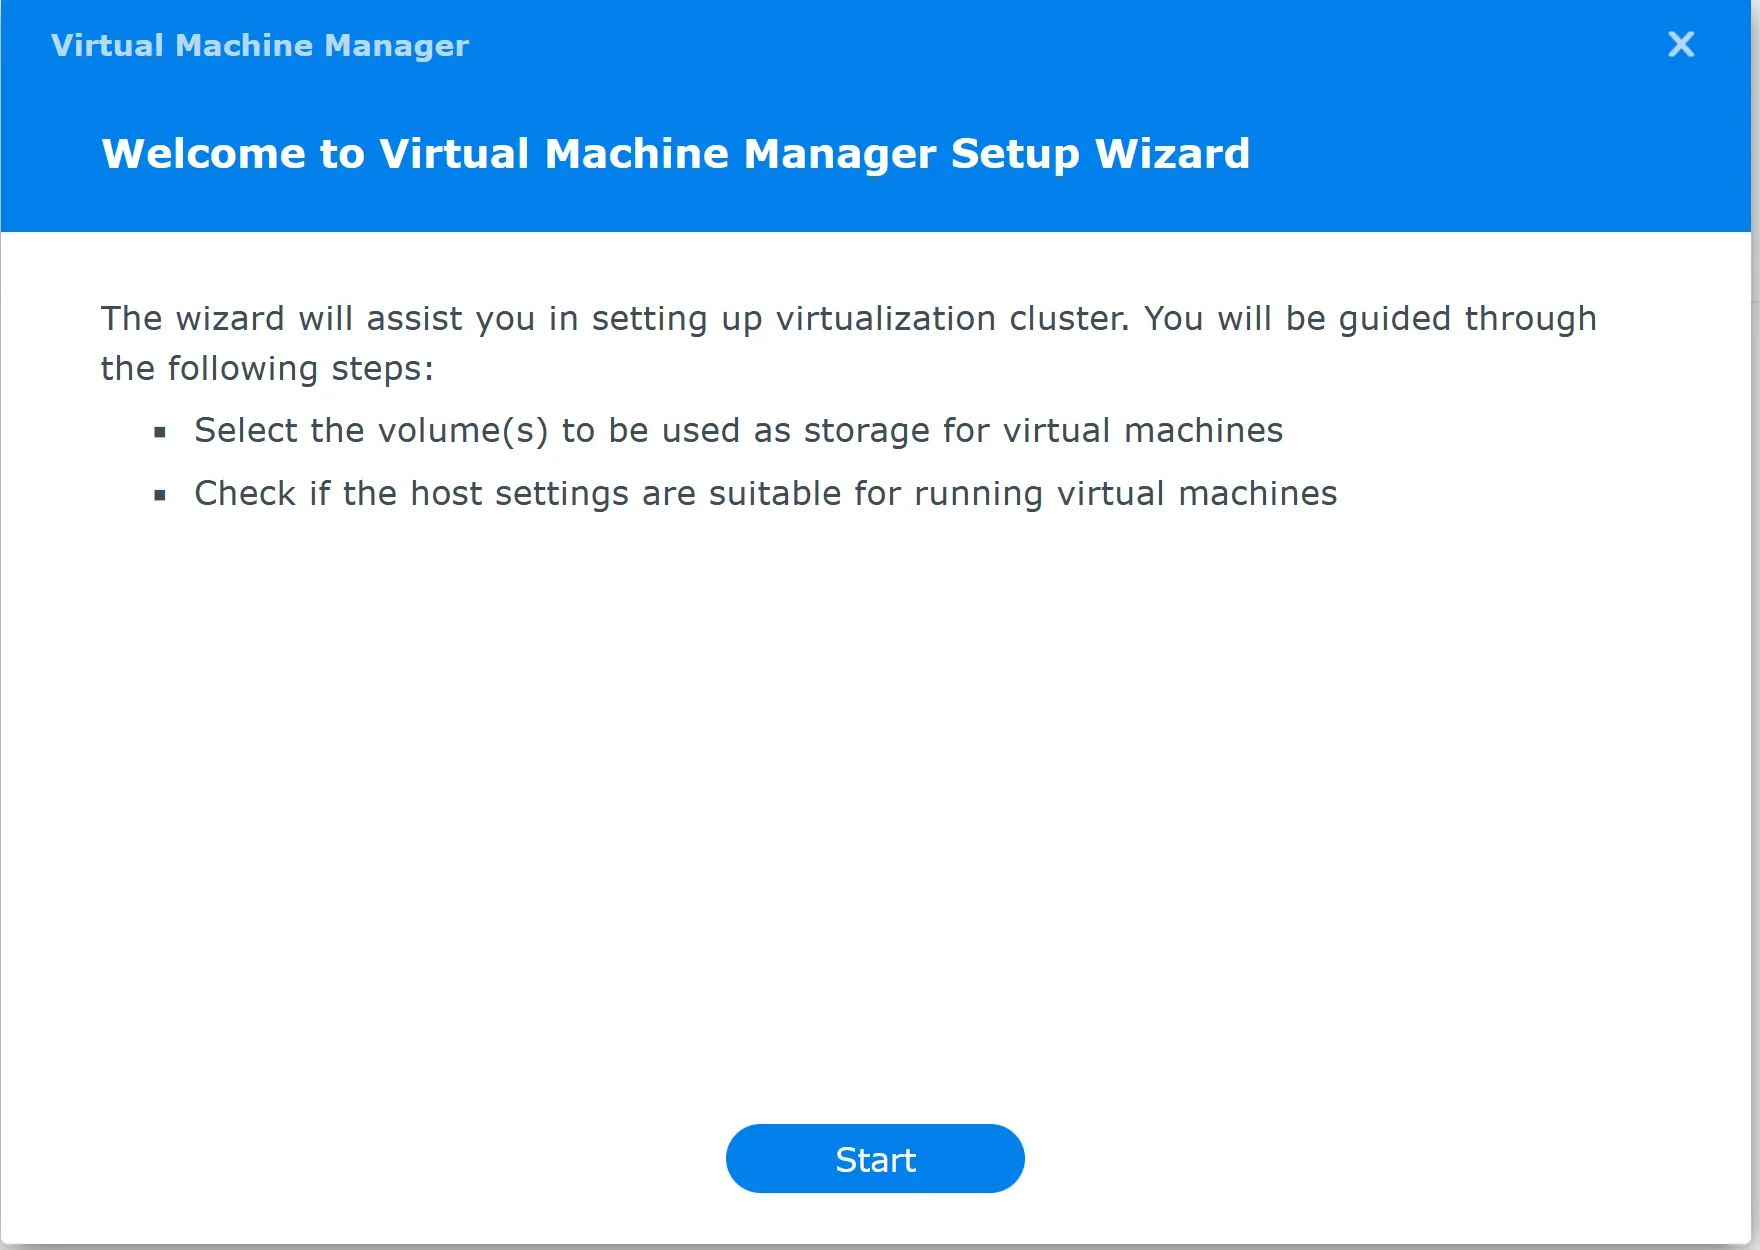 Virtual Machine Manager wizard completed